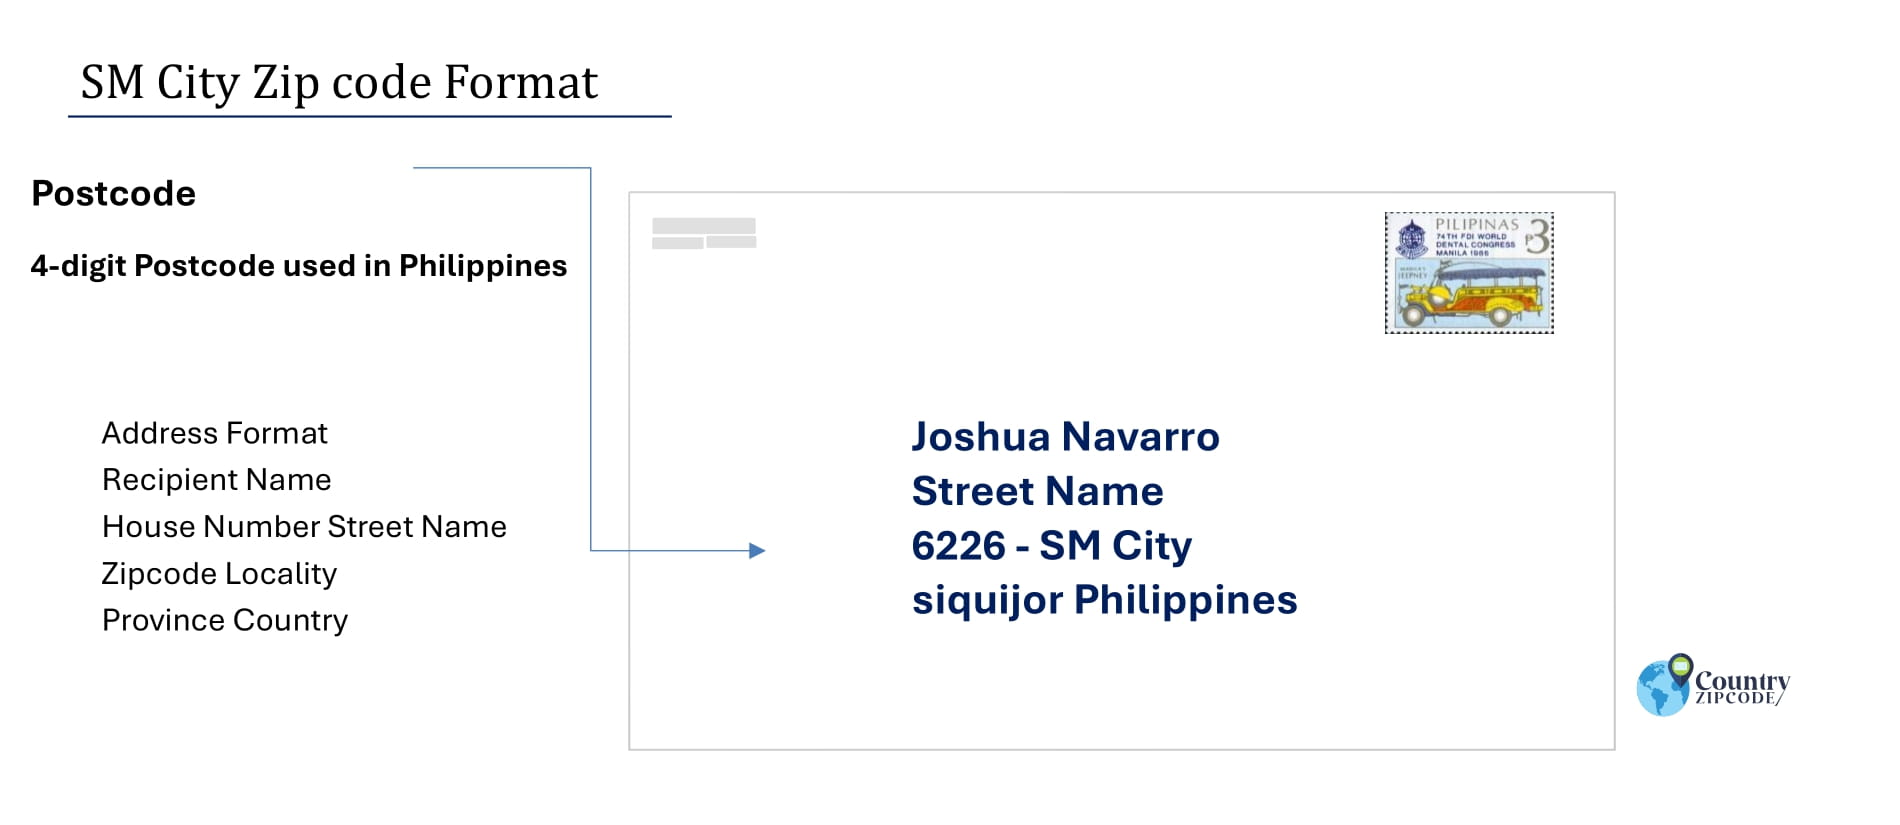 example of SM City Philippines zip code and address format